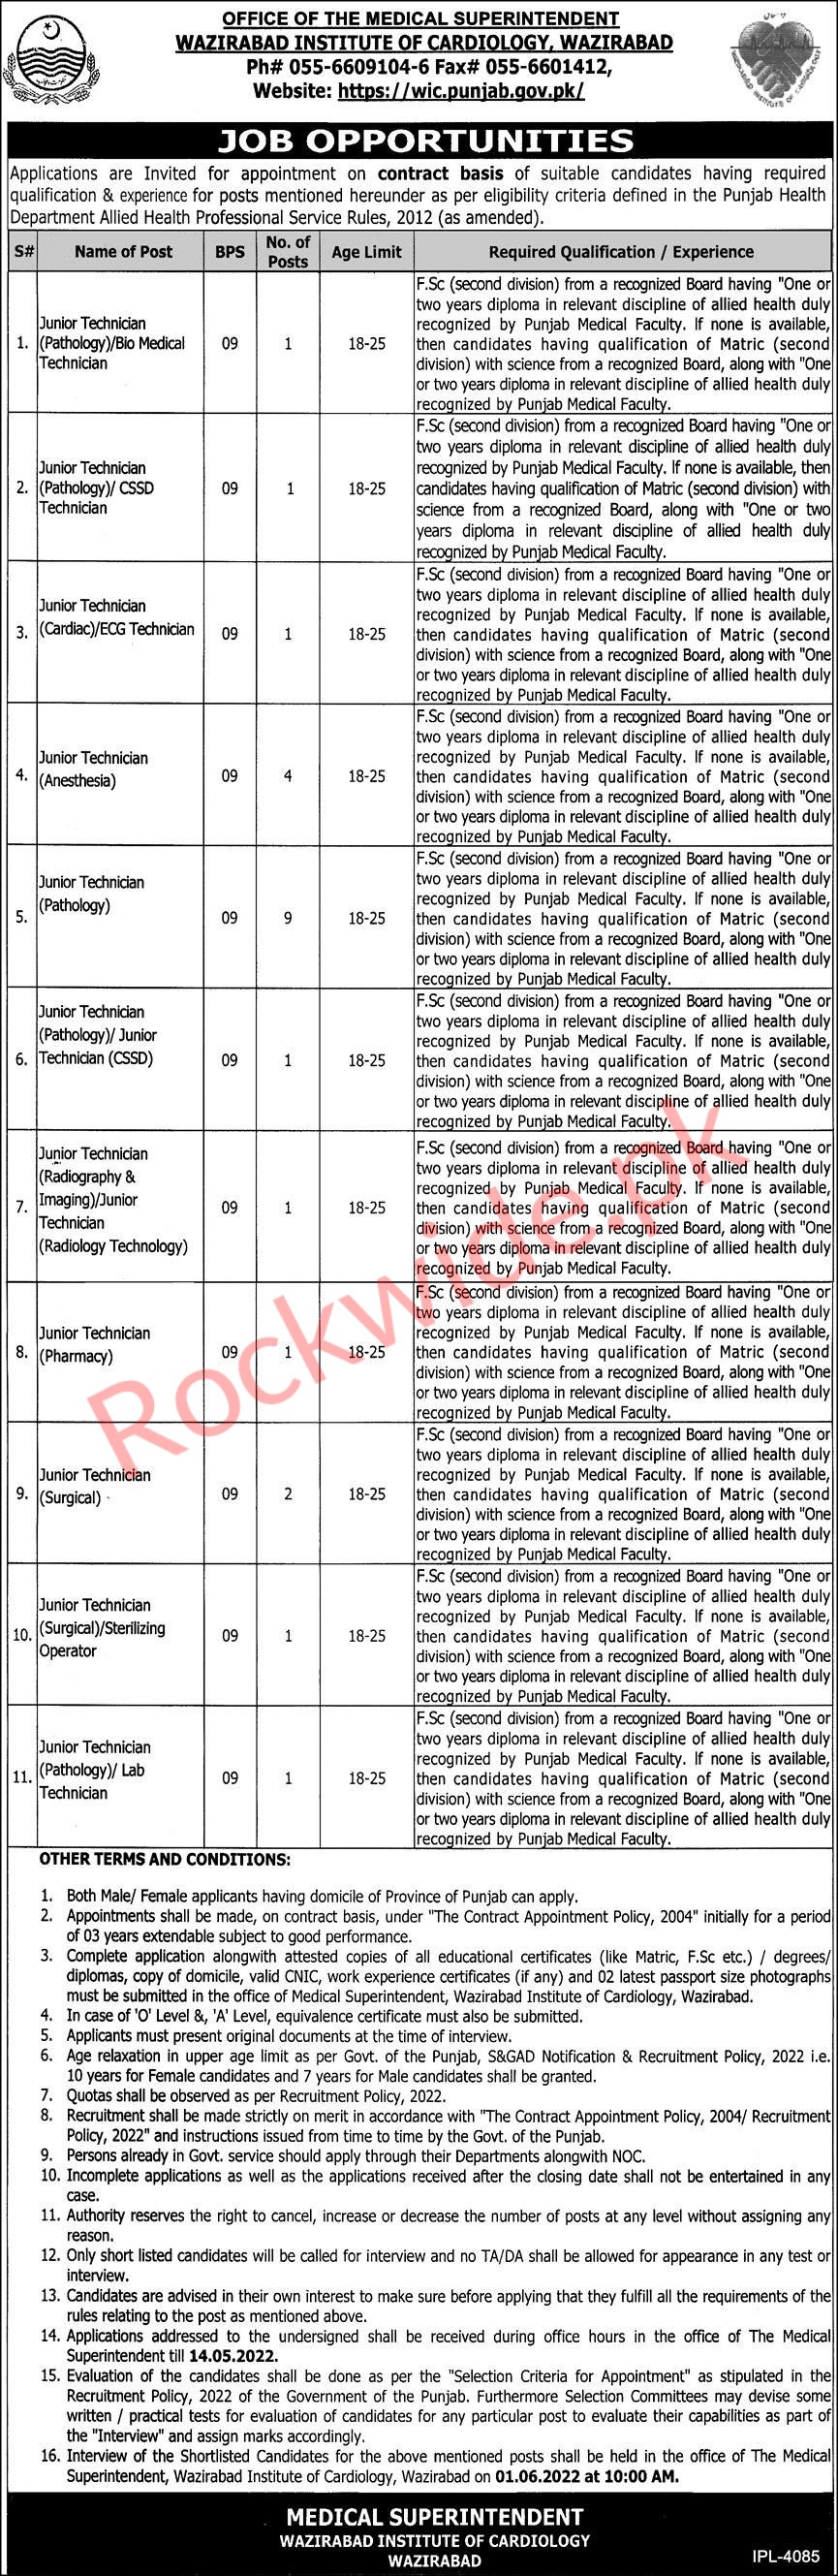 Office of The Medical Superintendent Wazirabad Institute of Cardiology jobs